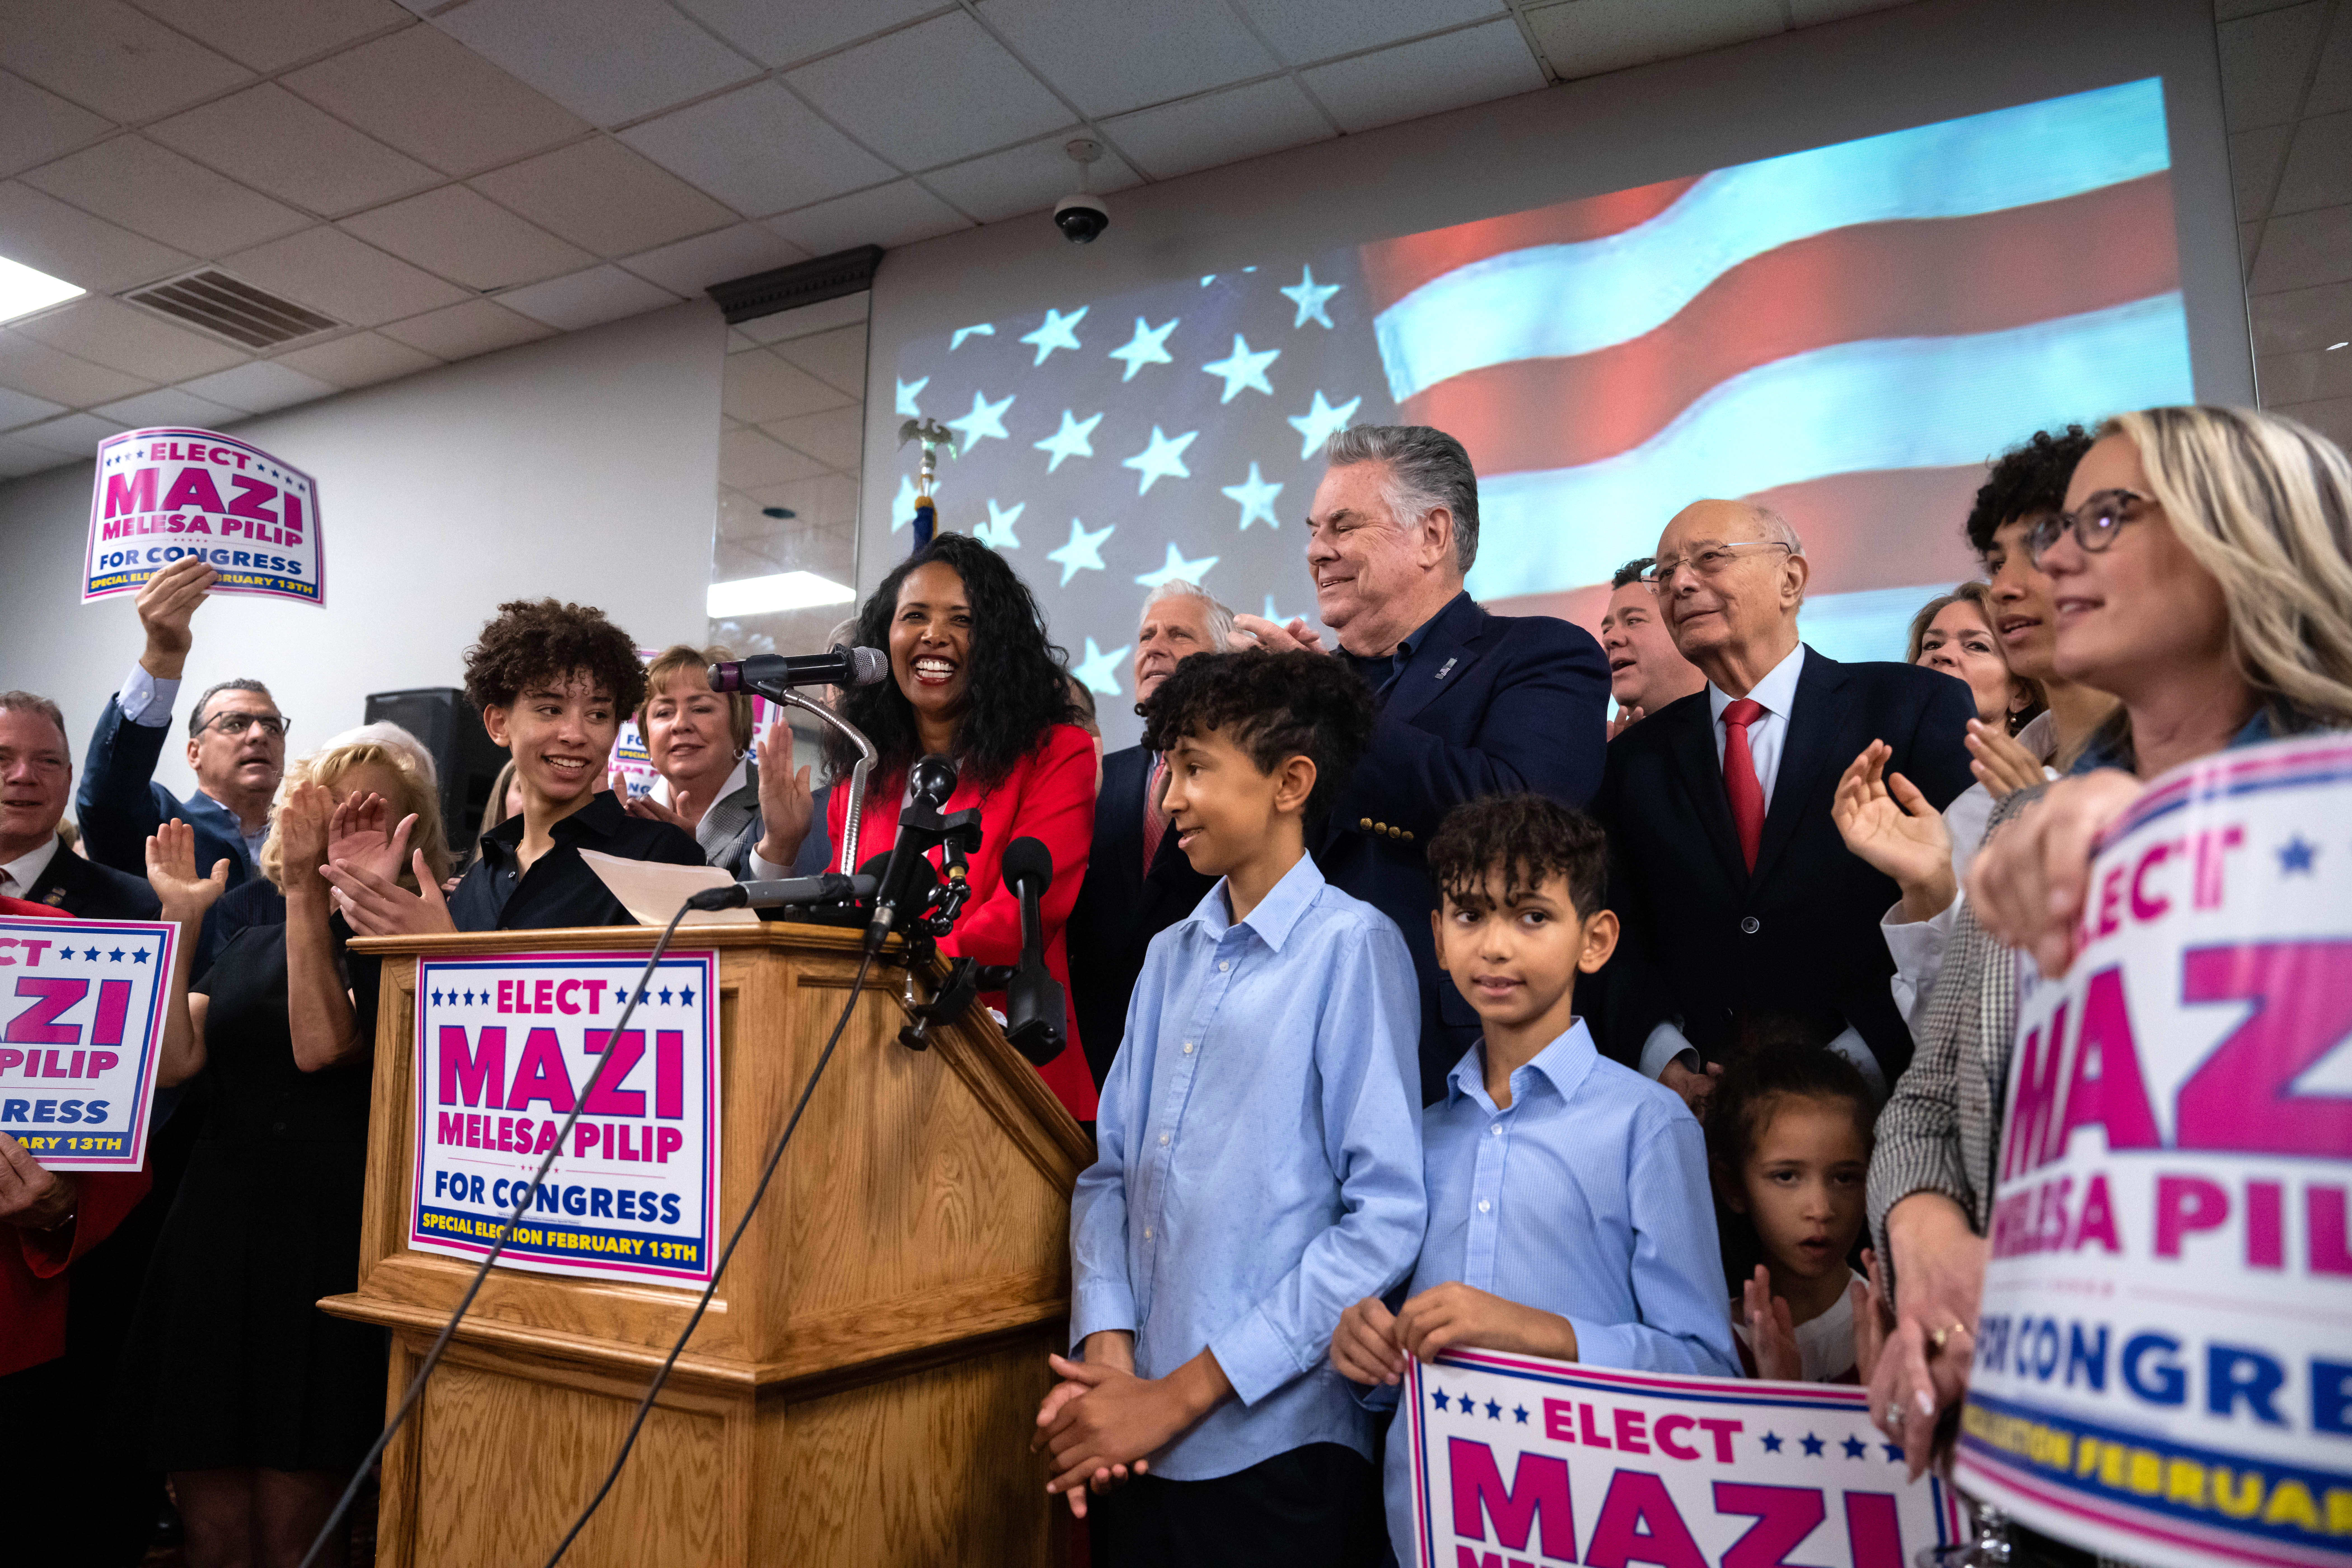 MASSAPEQUA, NEW YORK - DECEMBER 15: Nassau County legislator Mazi Melesa Pilip speaks during a press conference at American Legion Post 1066 on December 15, 2023 in Massapequa, New York. New York Republicans announced Pilip's nomination as their candidate to run in the February 13, 2024 special election for the House seat vacated by former Rep. George Santos (R-NY). (Photo by Adam Gray/Getty Images)